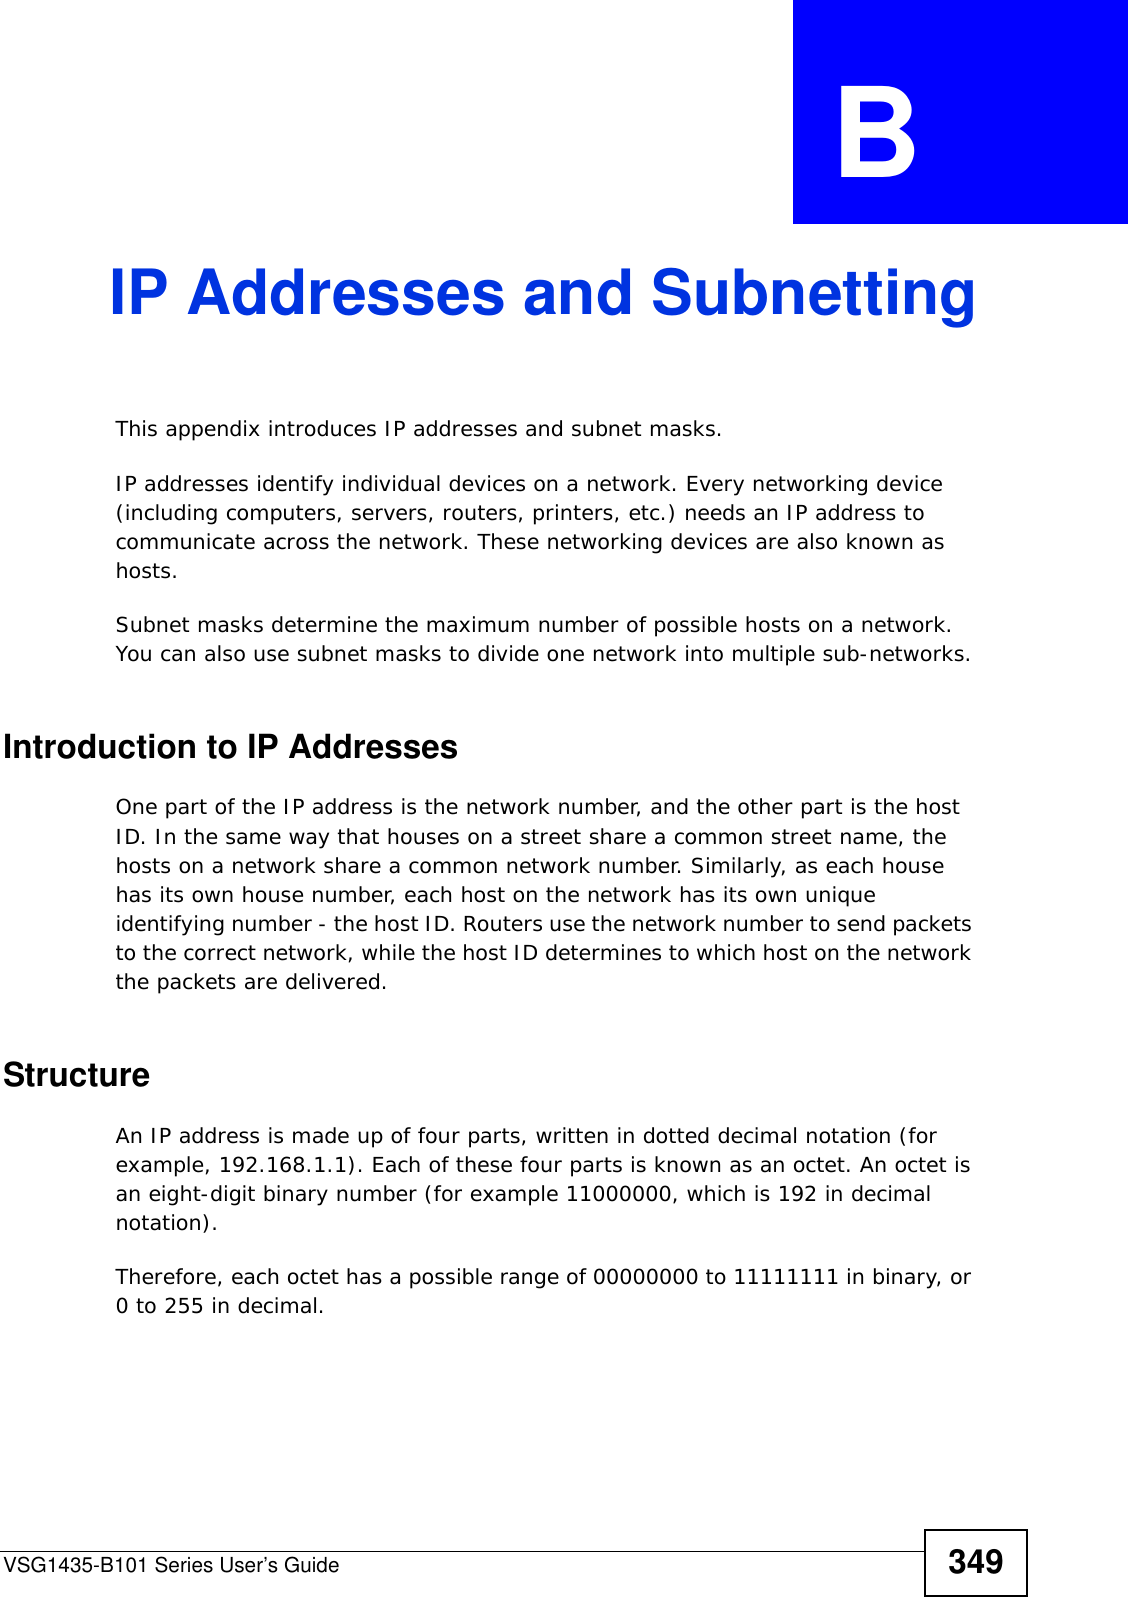 VSG1435-B101 Series User’s Guide 349APPENDIX  B IP Addresses and SubnettingThis appendix introduces IP addresses and subnet masks. IP addresses identify individual devices on a network. Every networking device (including computers, servers, routers, printers, etc.) needs an IP address to communicate across the network. These networking devices are also known as hosts.Subnet masks determine the maximum number of possible hosts on a network. You can also use subnet masks to divide one network into multiple sub-networks.Introduction to IP AddressesOne part of the IP address is the network number, and the other part is the host ID. In the same way that houses on a street share a common street name, the hosts on a network share a common network number. Similarly, as each house has its own house number, each host on the network has its own unique identifying number - the host ID. Routers use the network number to send packets to the correct network, while the host ID determines to which host on the network the packets are delivered.StructureAn IP address is made up of four parts, written in dotted decimal notation (for example, 192.168.1.1). Each of these four parts is known as an octet. An octet is an eight-digit binary number (for example 11000000, which is 192 in decimal notation). Therefore, each octet has a possible range of 00000000 to 11111111 in binary, or 0 to 255 in decimal.